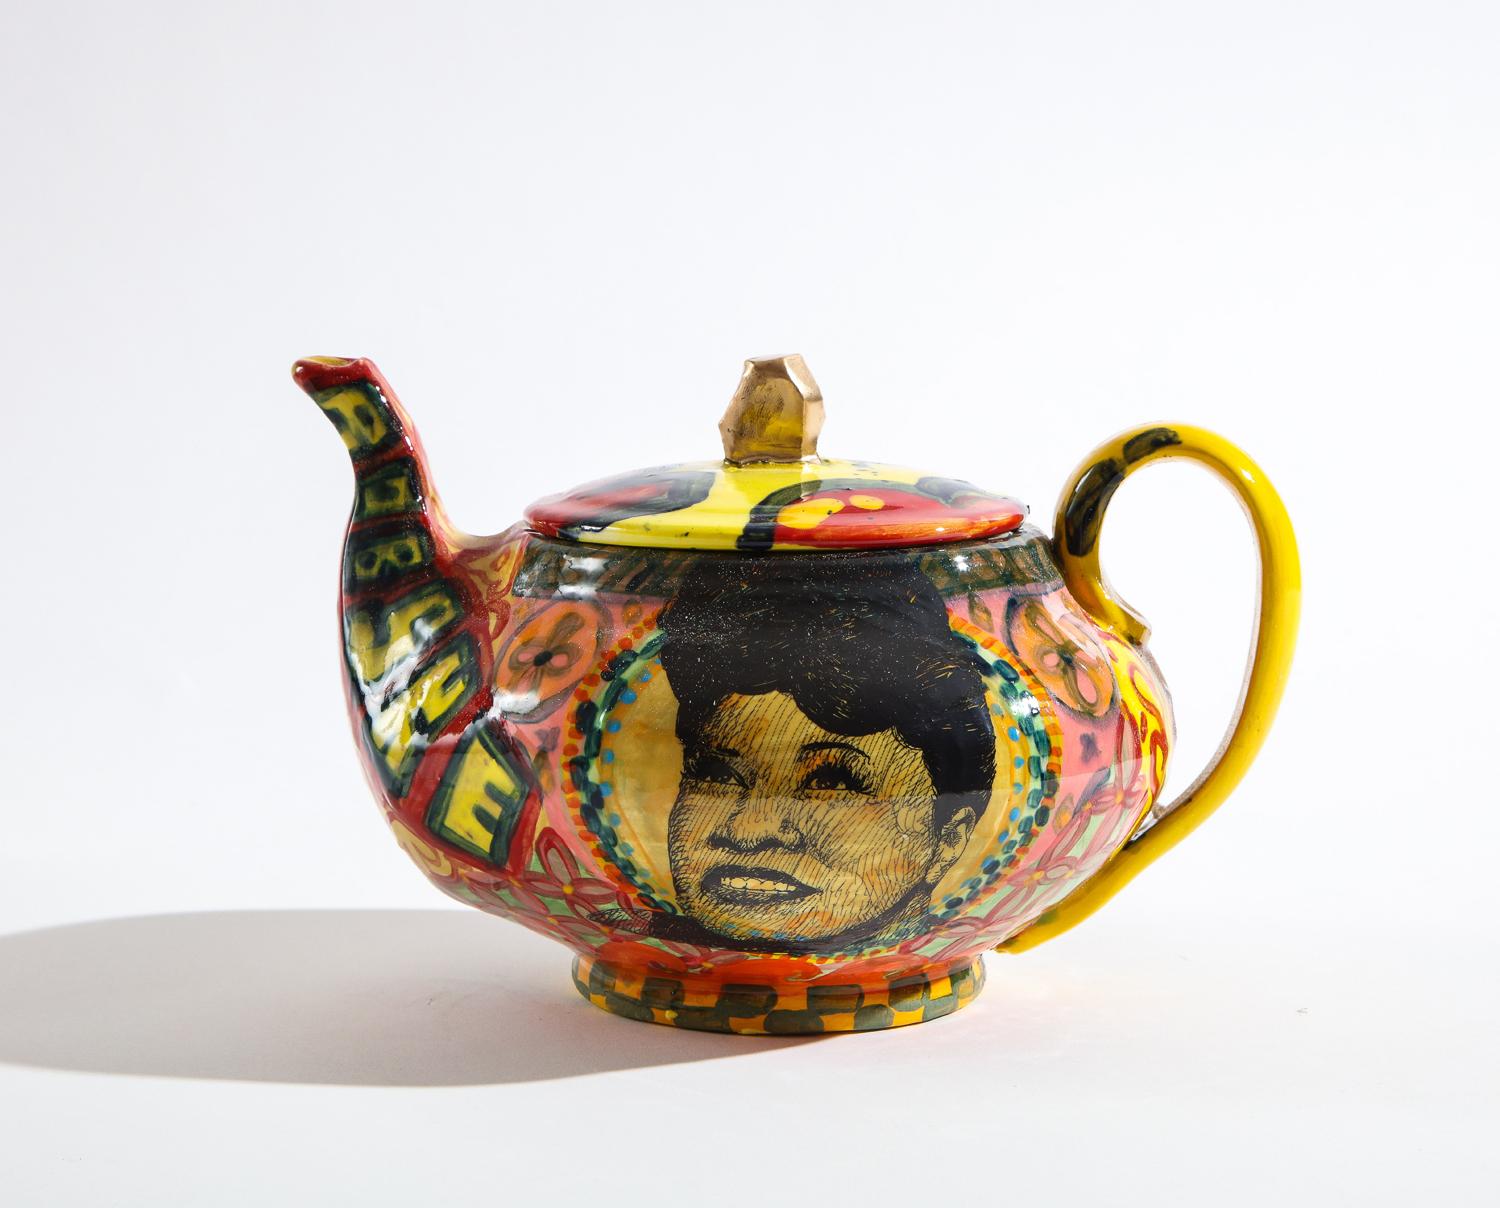 Contemporary Marian Anderson Teapot and Box Set in Glazed Porcelain and Wood by Roberto Lugo